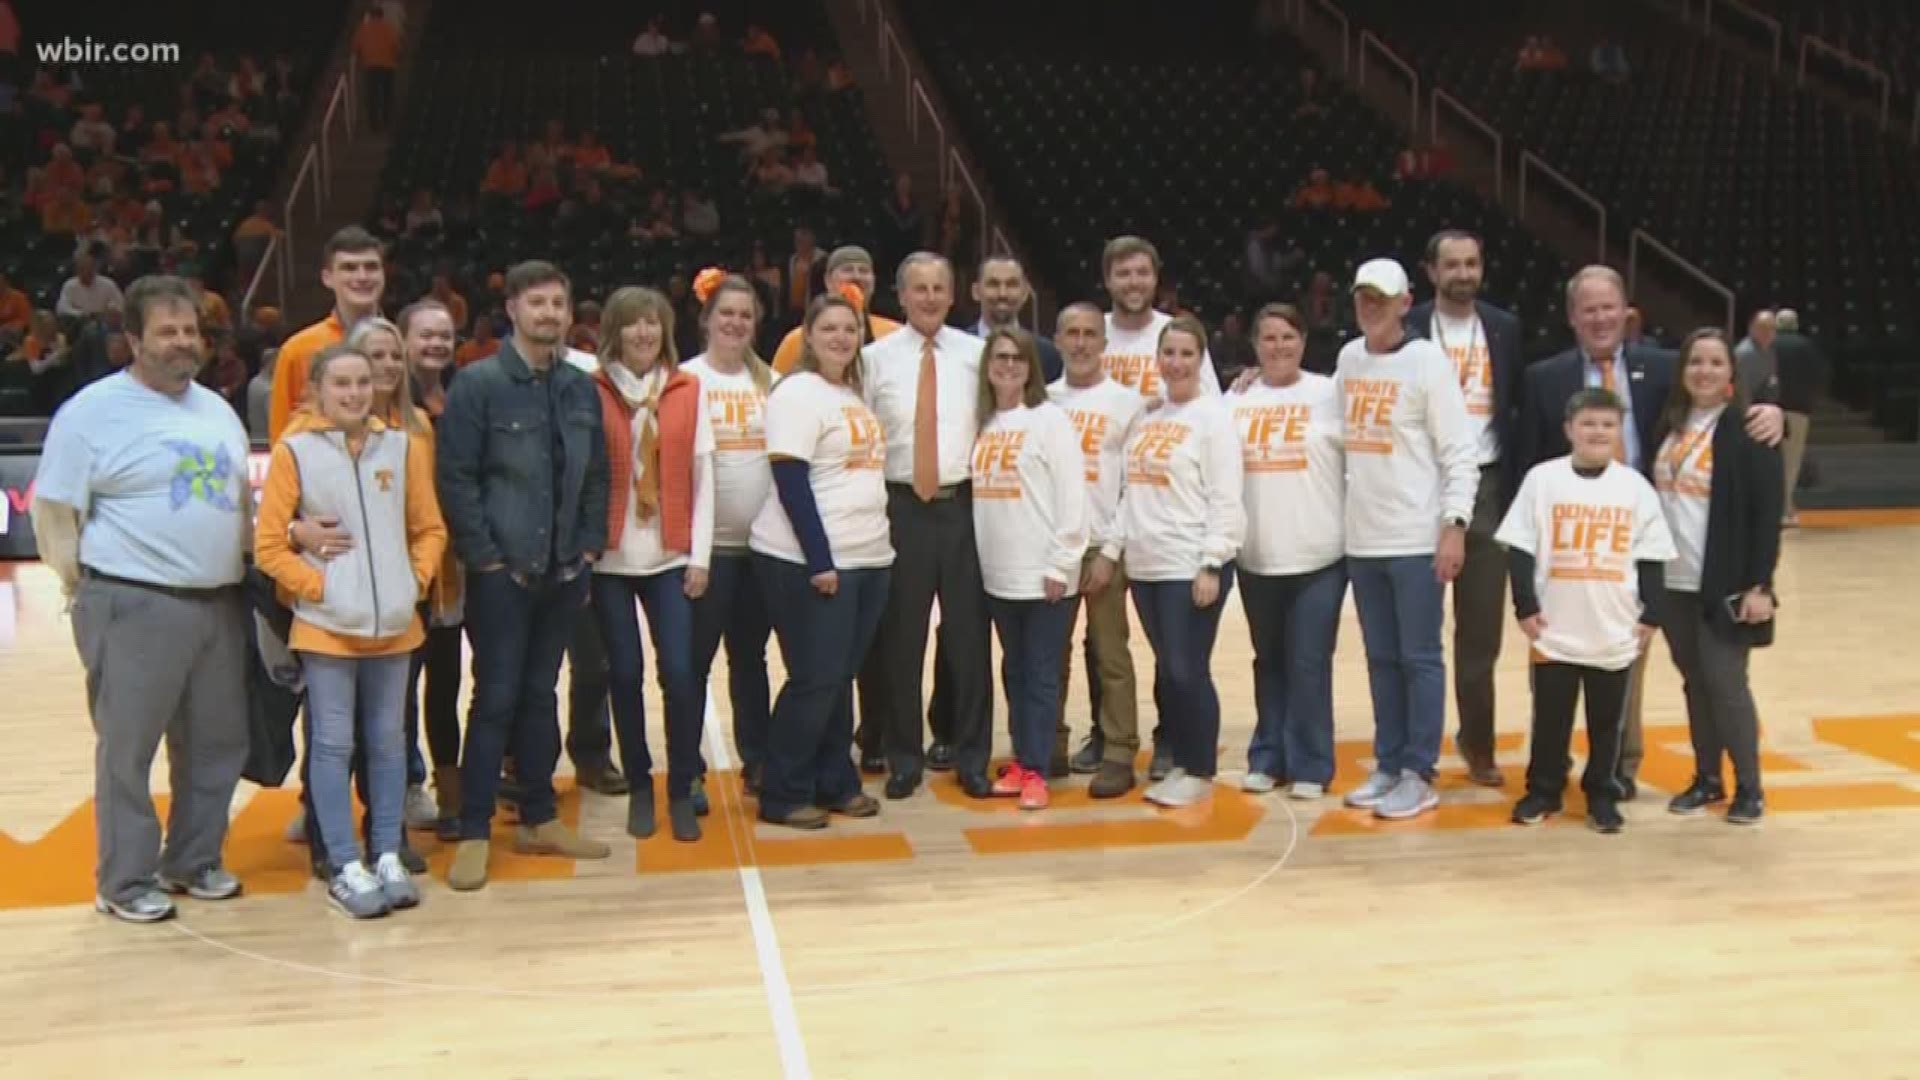 Tonight, while the Vols won on the court, they were also looking for a win off the court. Tonight was Donate Life Night and Coach Rick Barnes encouraged Tennessee Fans to register as organ donors.